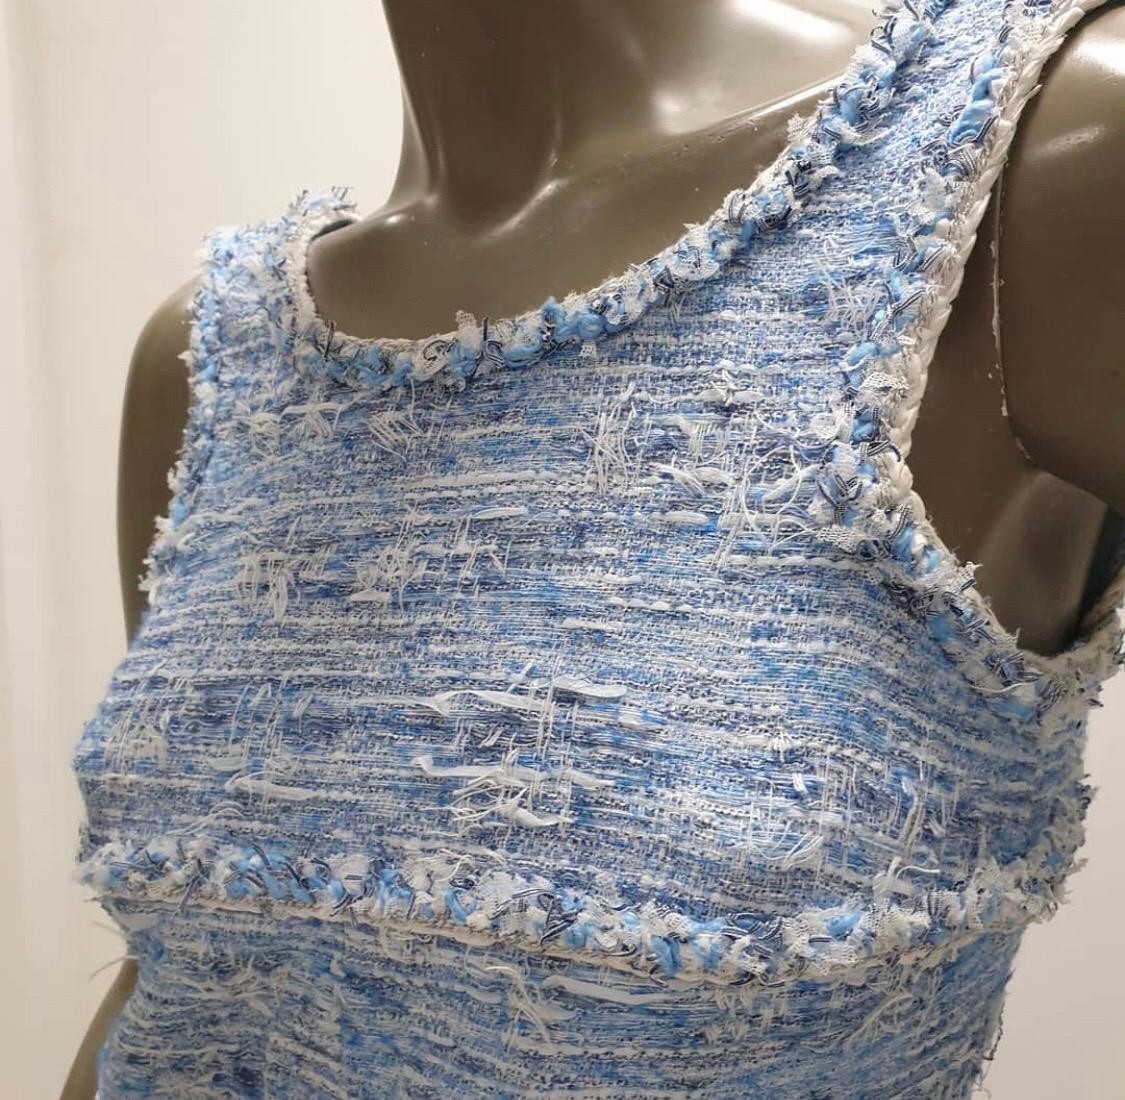 Most Wanted Chanel 15P Blue White Fantasy Fringe Tweed Ribbon Dress
TWEED DRESS WITH LESAGE BRAIDED TRIM.
Breathtaking - as seen in fashion magazines and celebrities
 Fashionista favorite!
Highly sought after.
 Sold out immediately
Impossible to